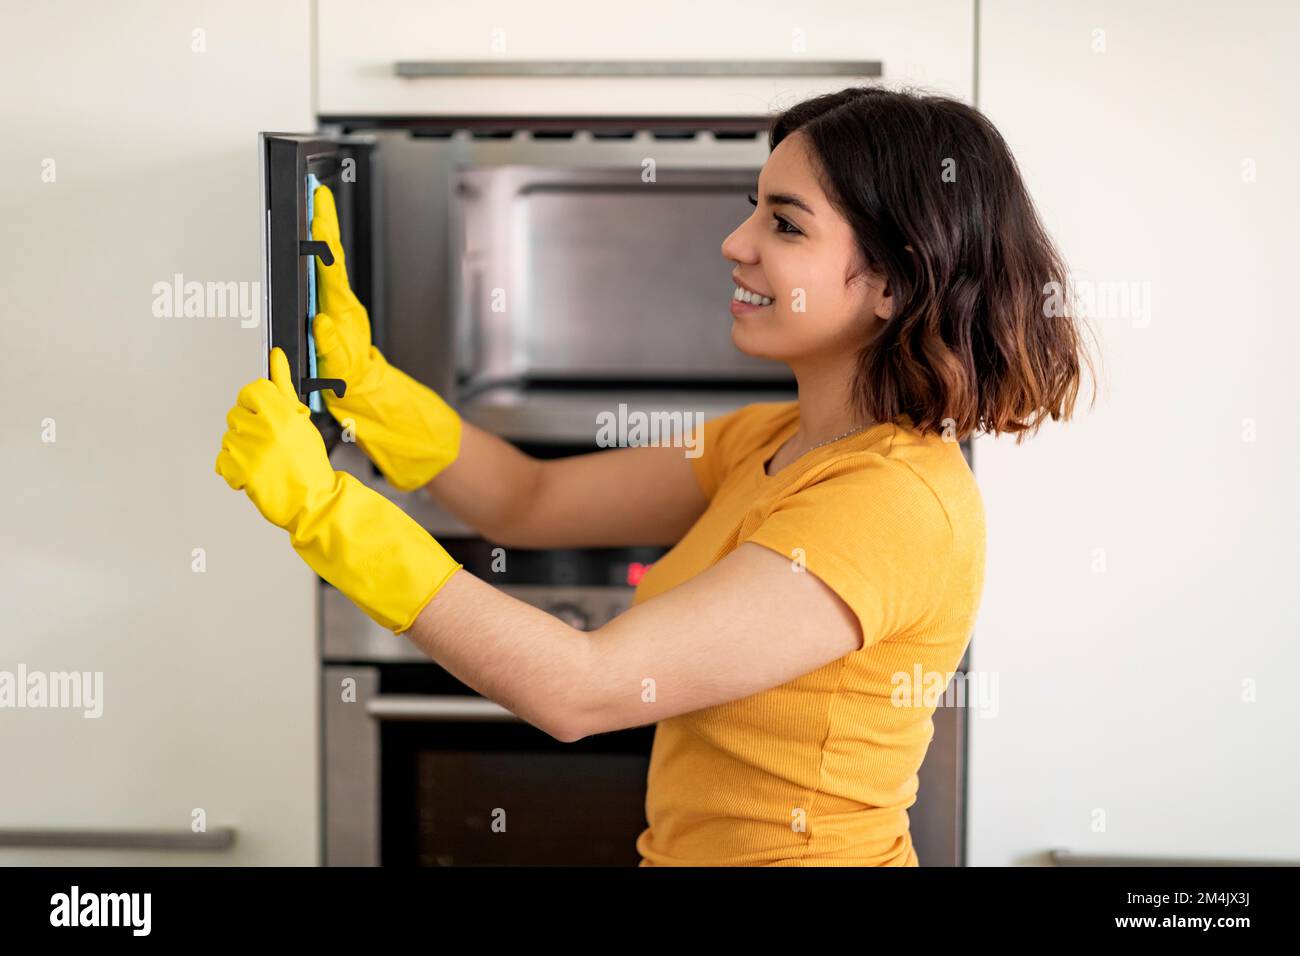 Housekeeping Concept. Smiling Arab Woman In Rubber Gloves Wiping Microwave From Dirt Stock Photo